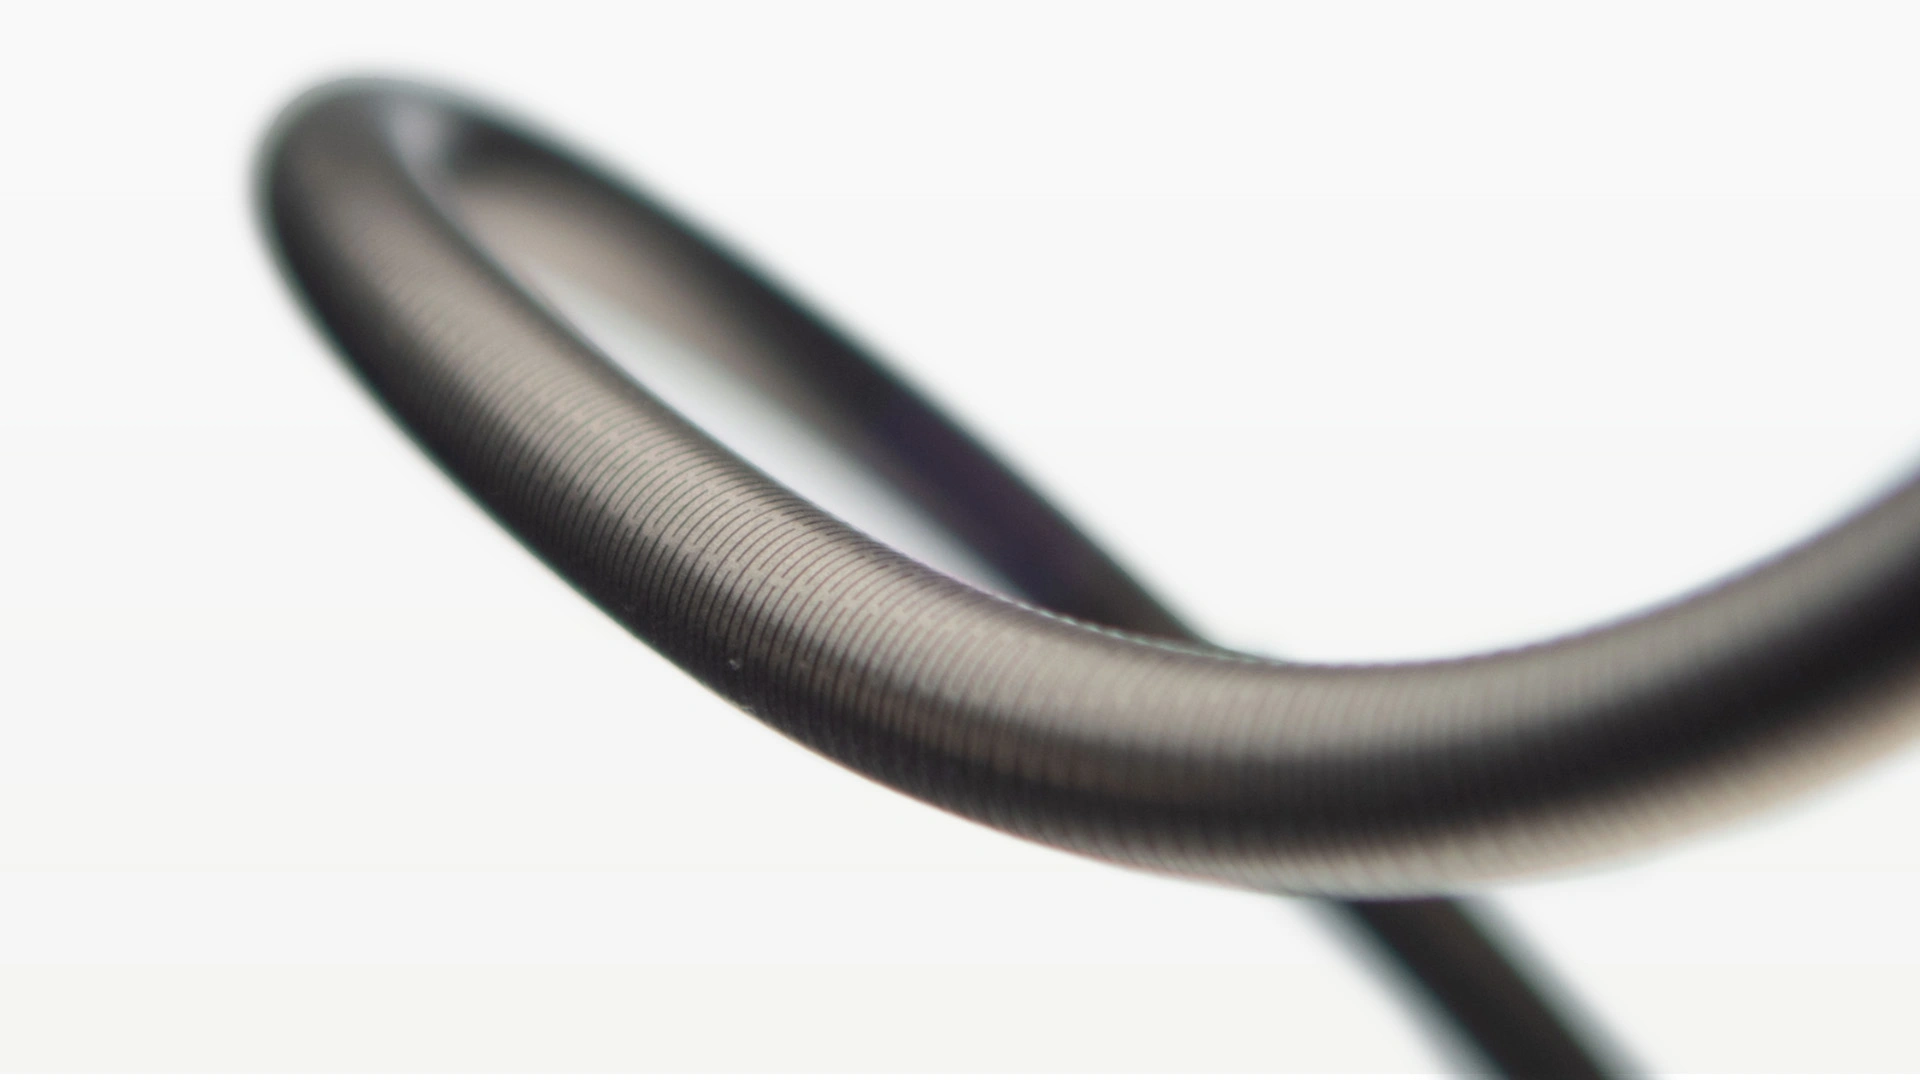 Close up of Support Zone on curved BMX 81 Access Catheter